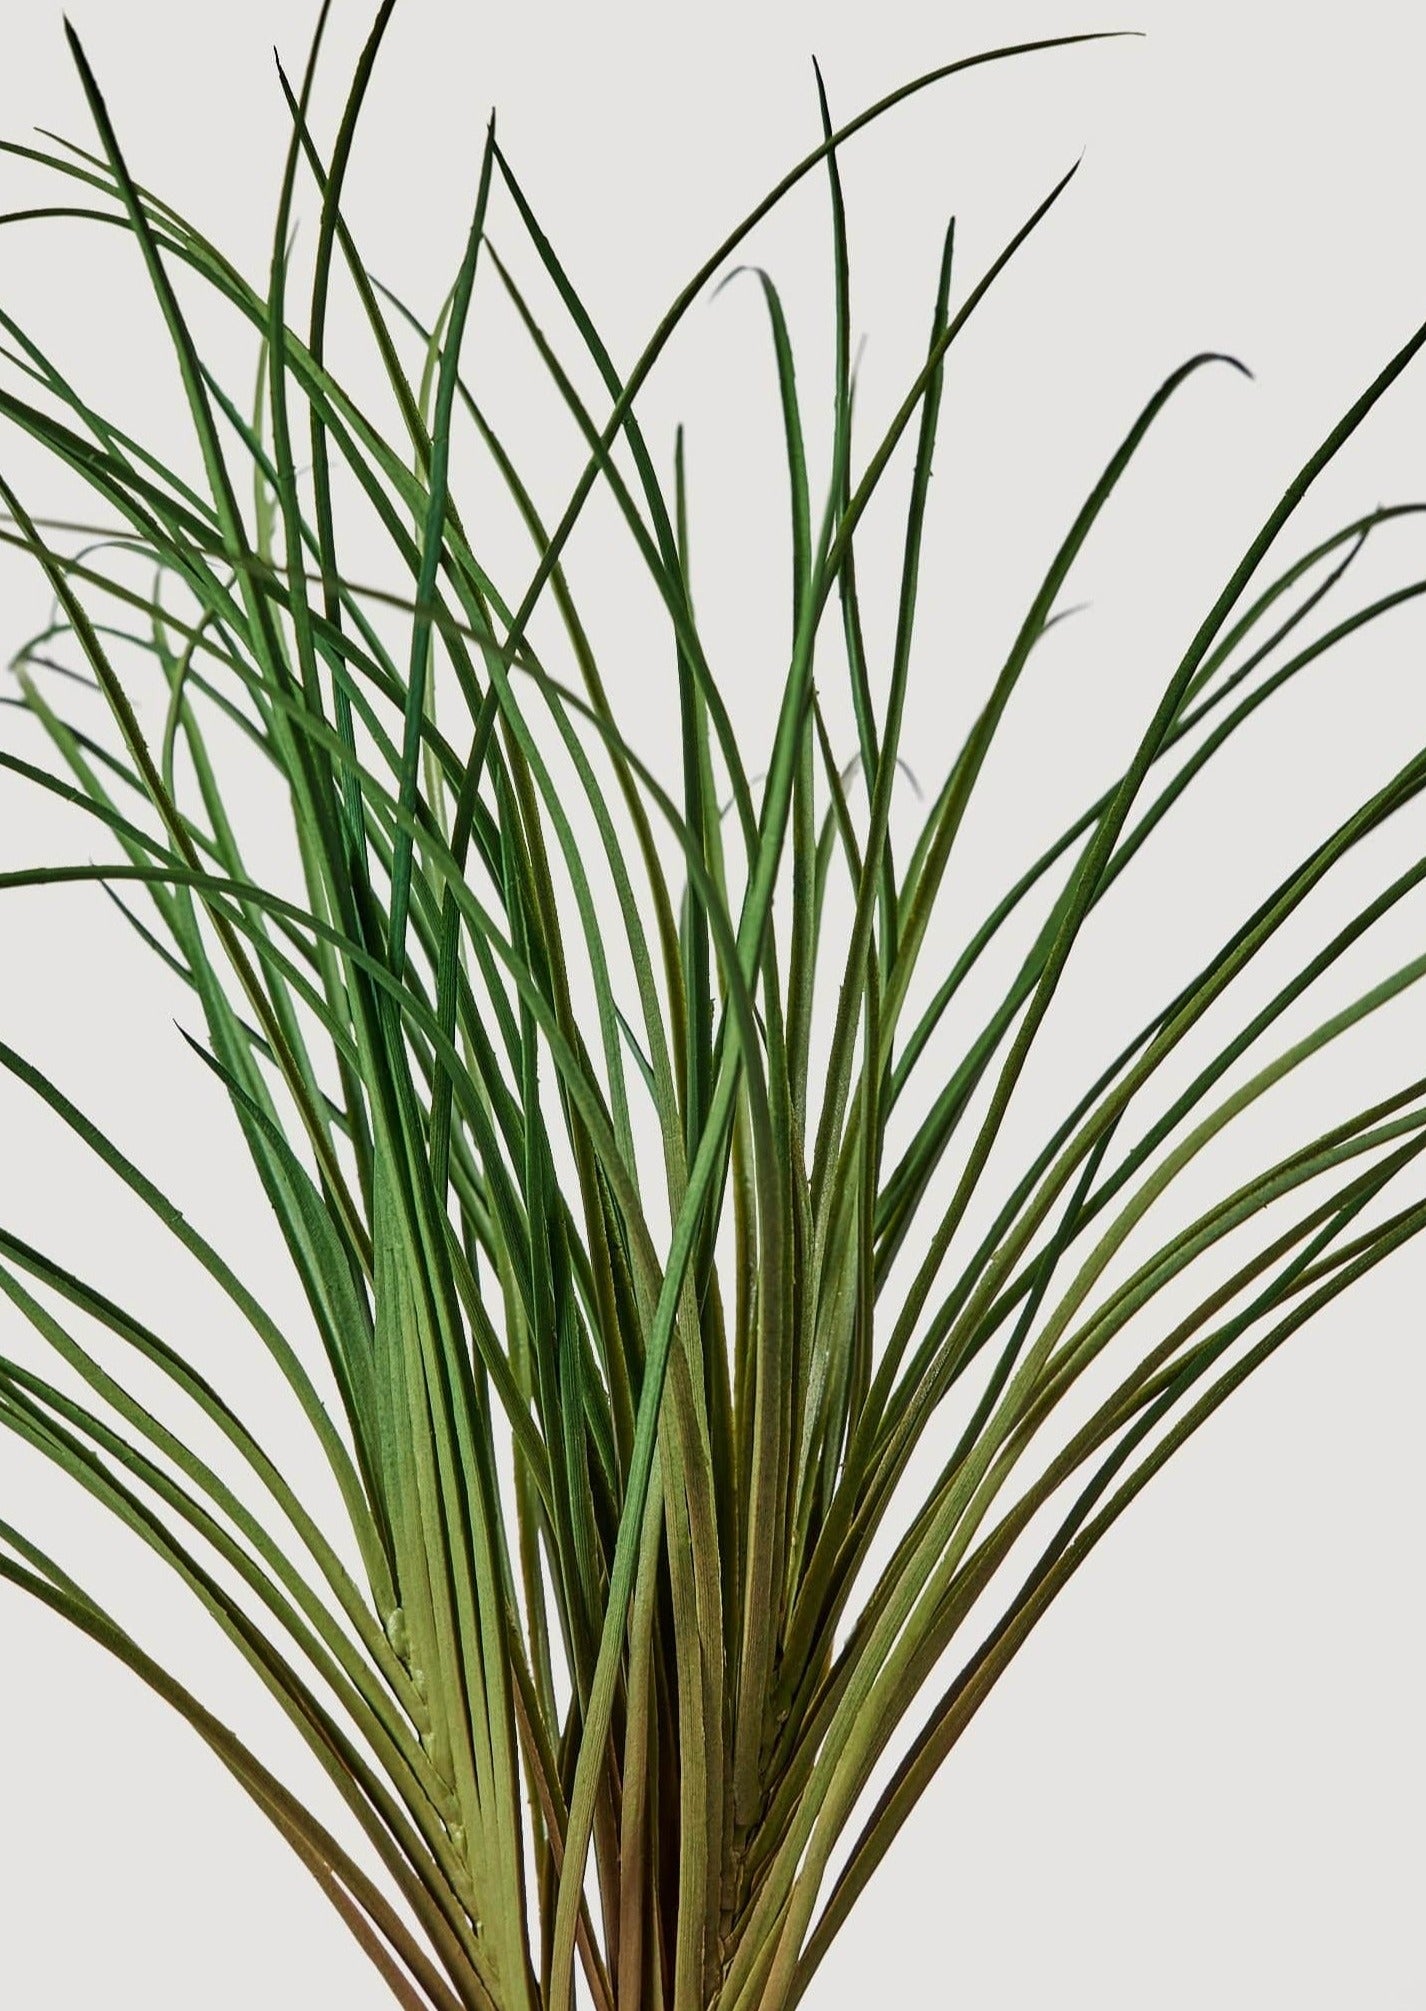 Faux Onion Grass Plant in Closeup View